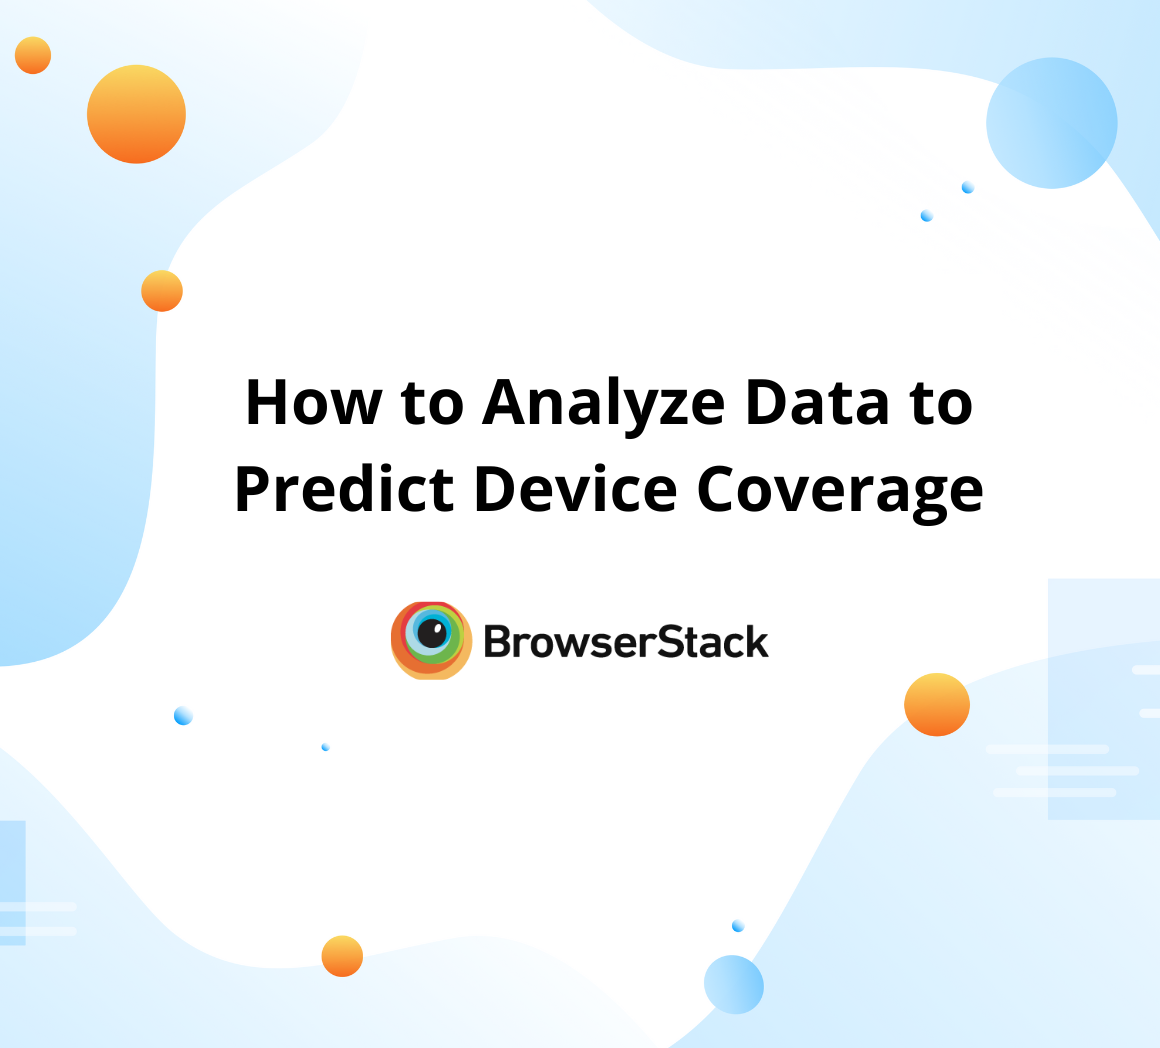 How to Analyze Data to Predict Device Coverage